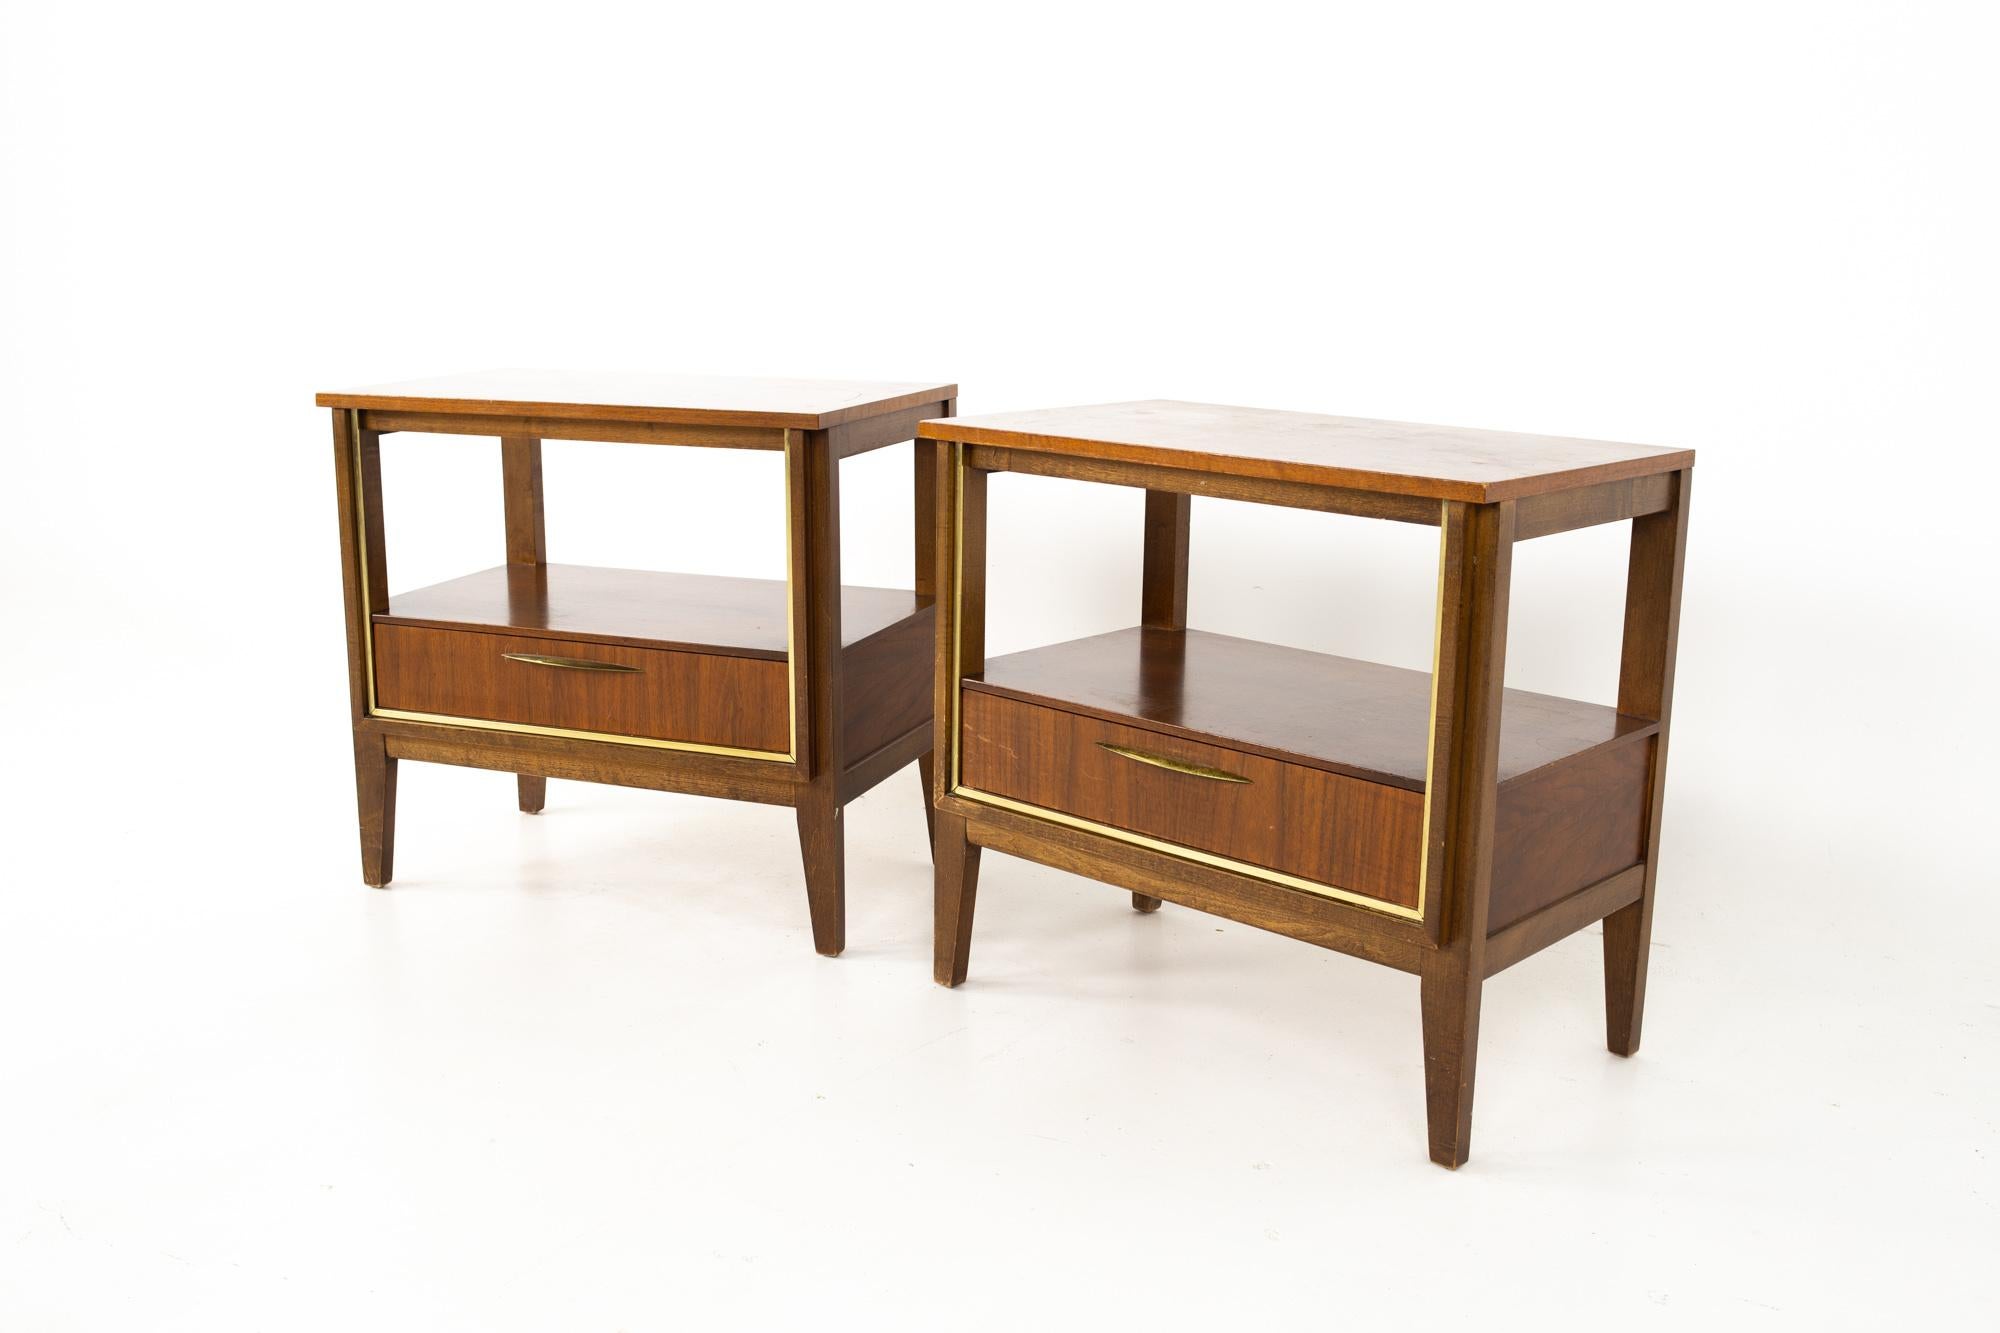 Paul McCobb style West Michigan Furniture Company mid century walnut and brass nightstands - pair.
Each nightstand measures: 24 wide x 15 deep x 23 inches high

All pieces of furniture can be had in what we call restored vintage condition. That